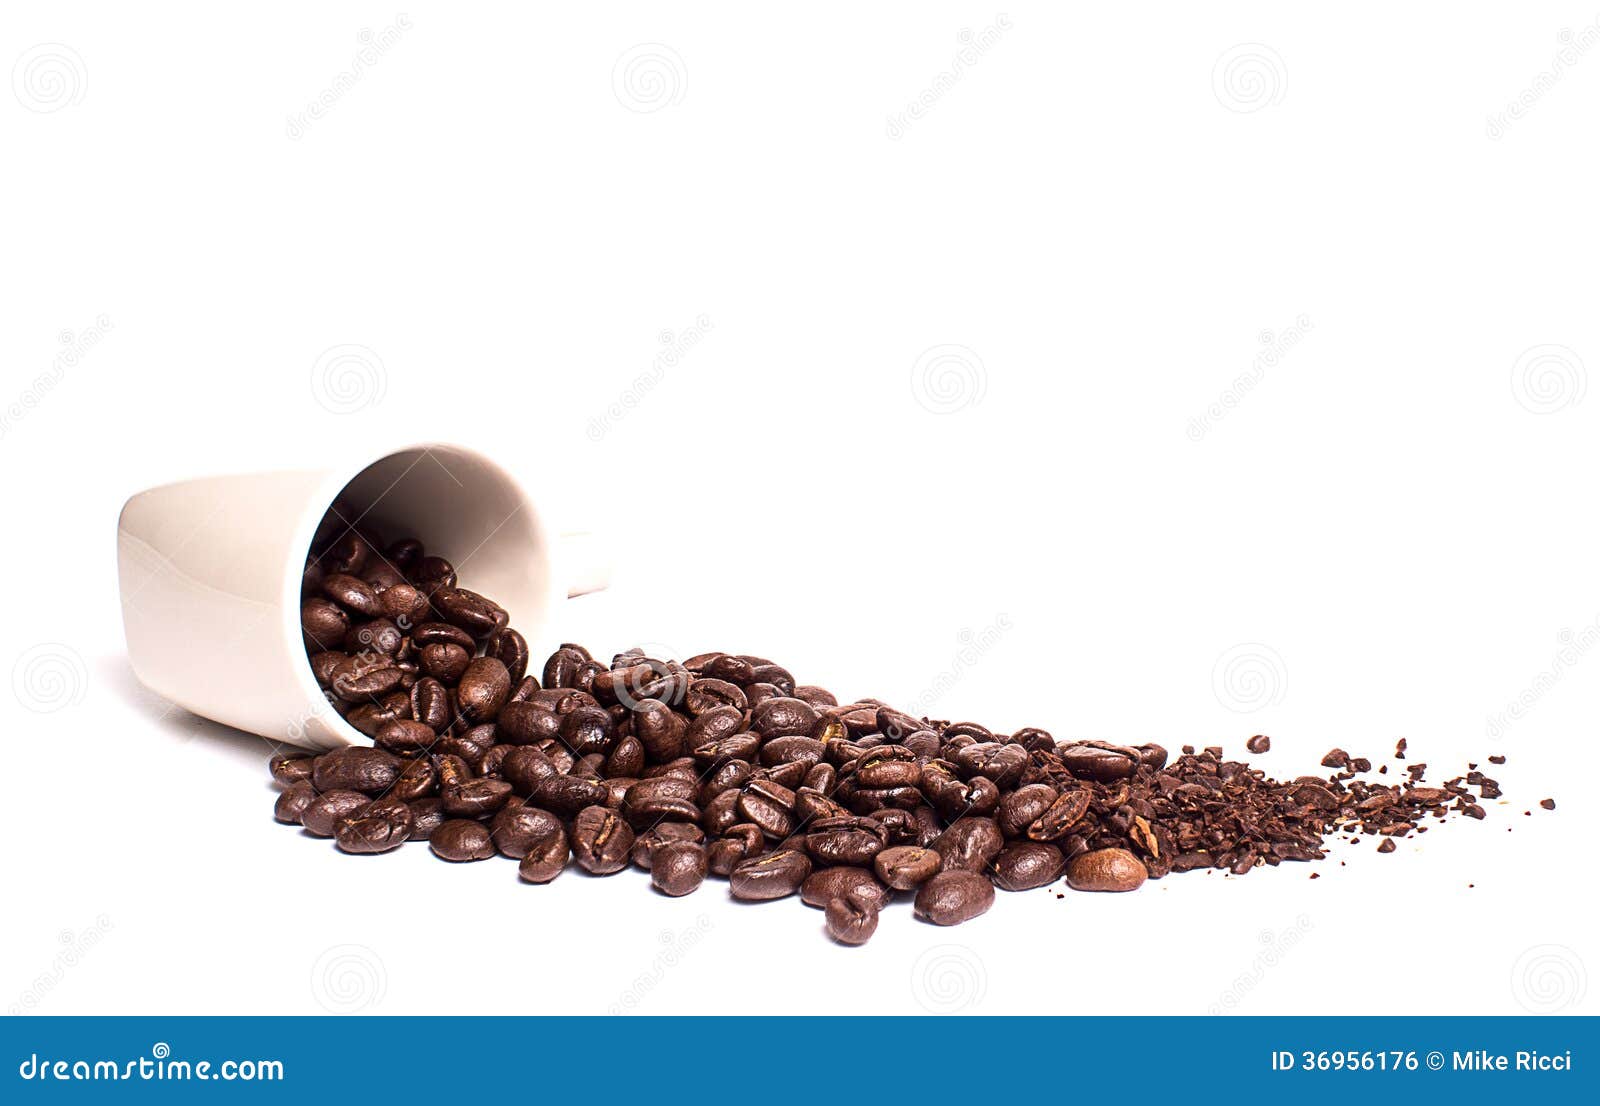 spilled coffee beans